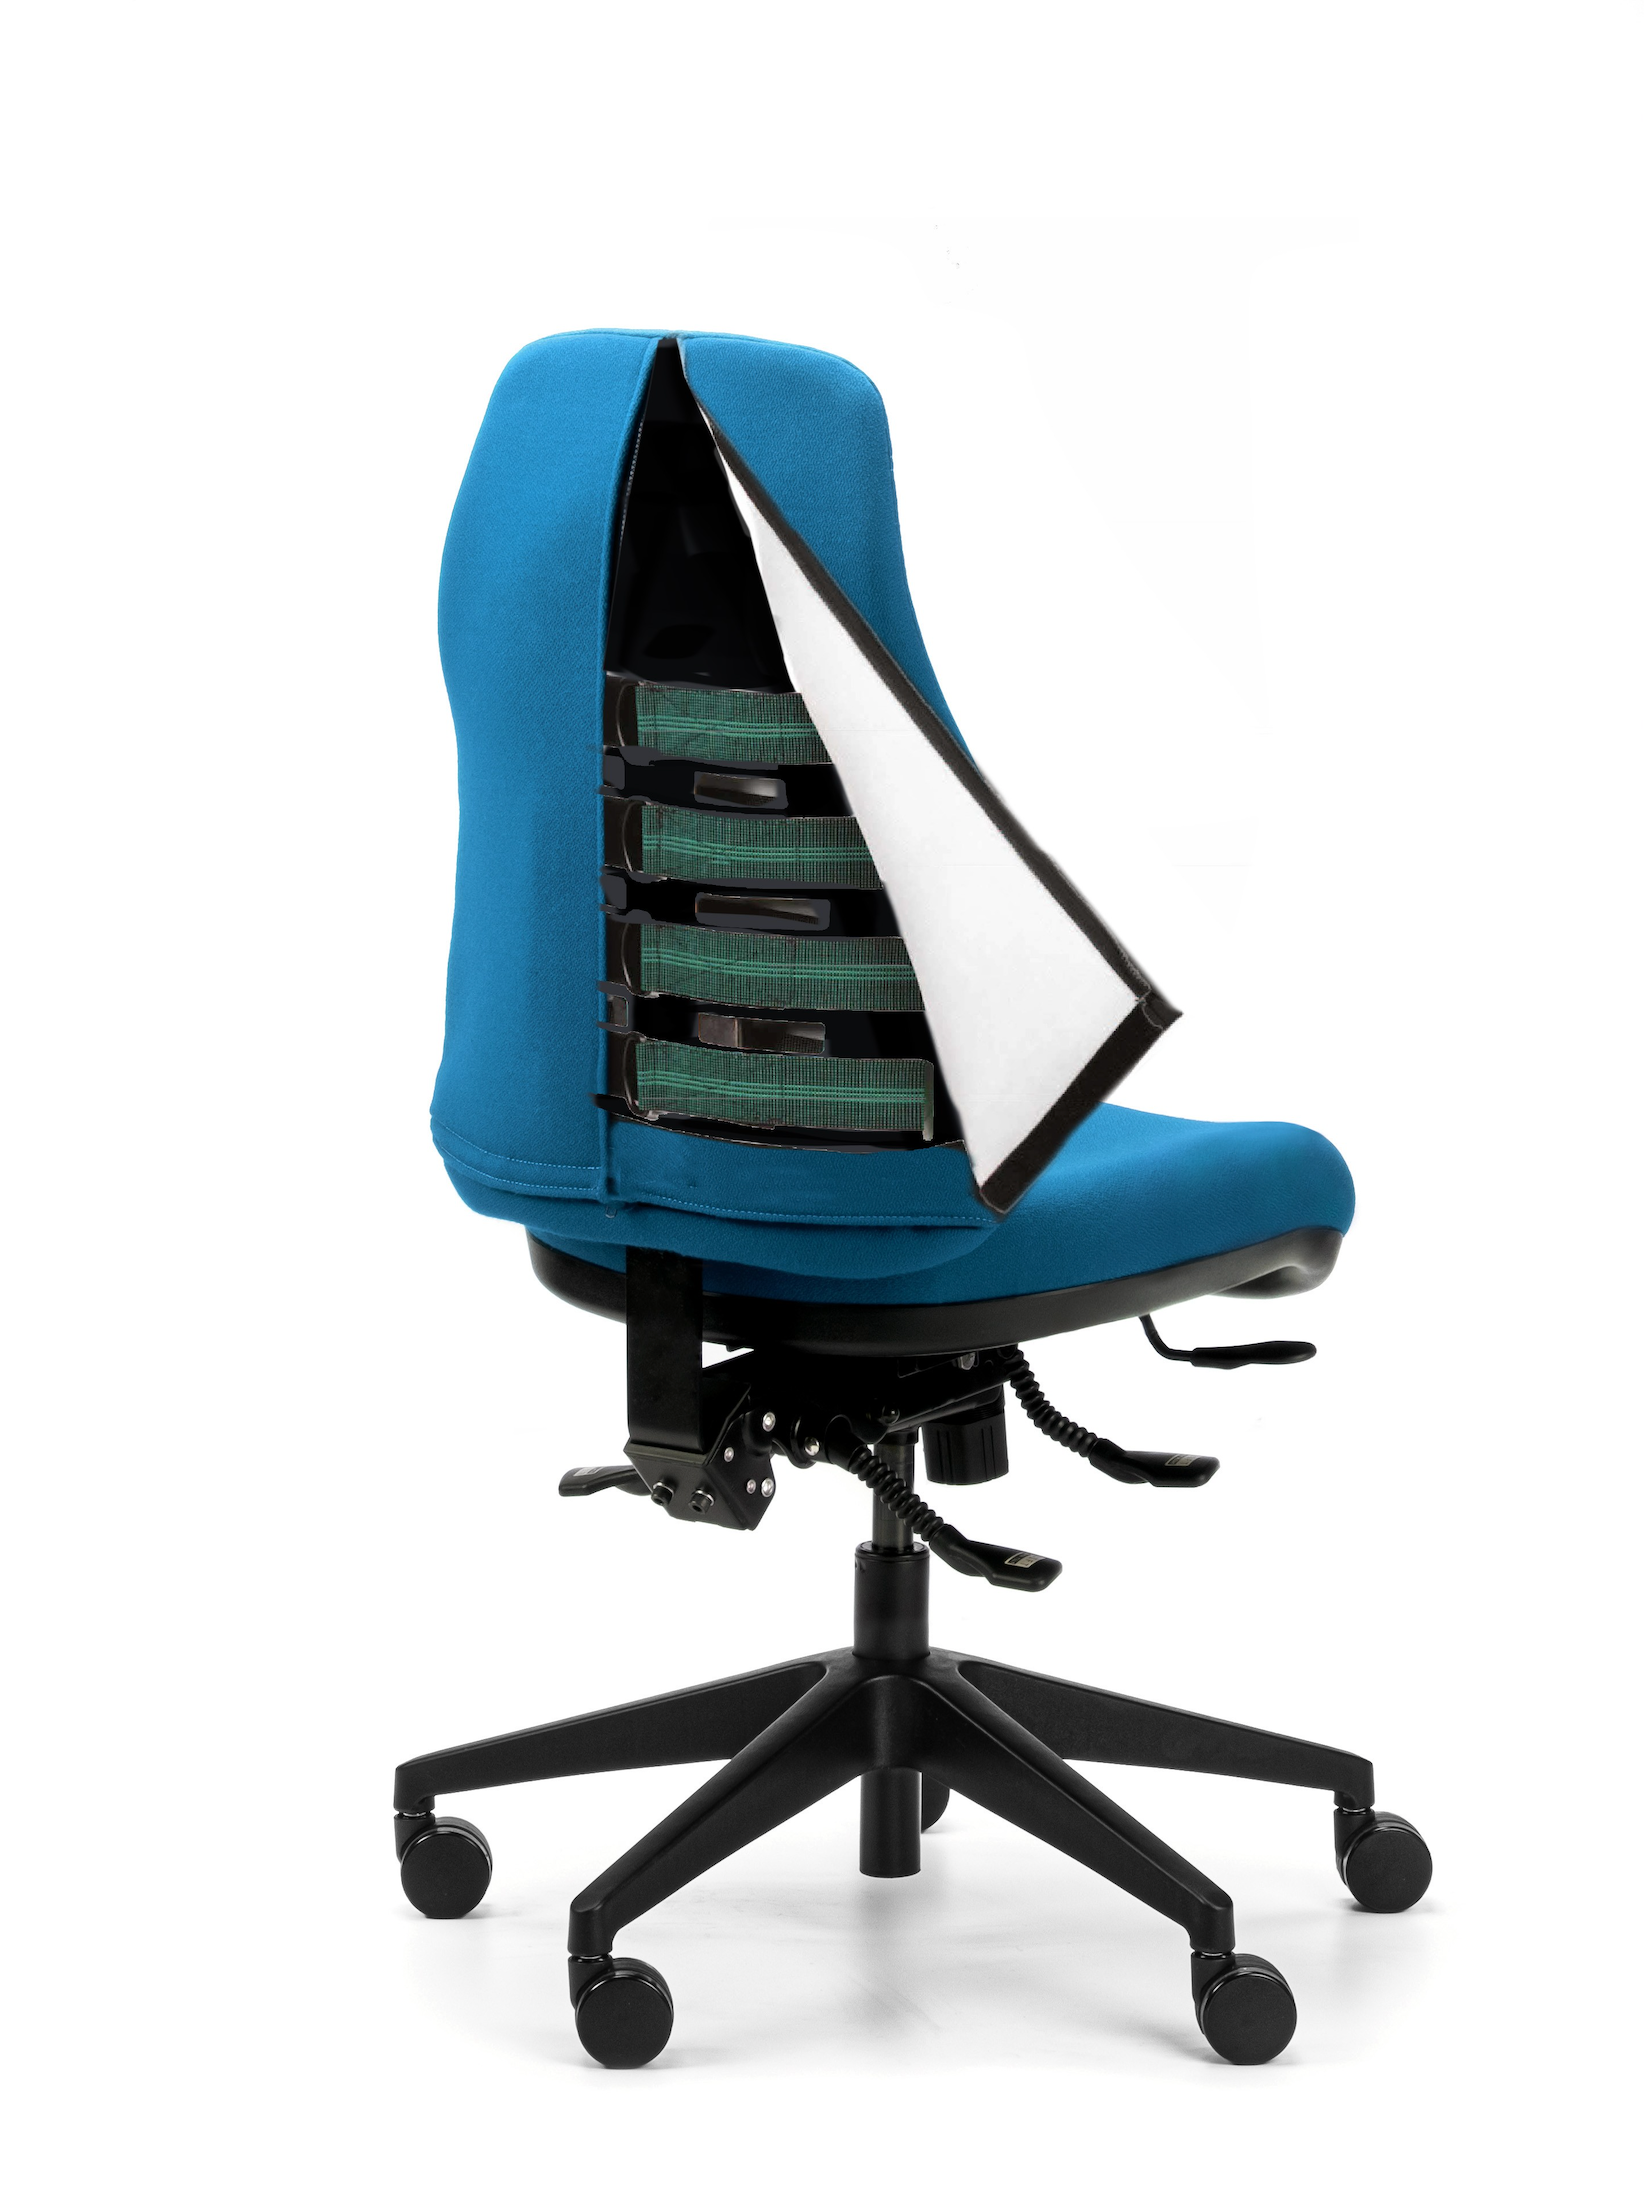 Chair Solutions Therapod Orthopod Office Chair